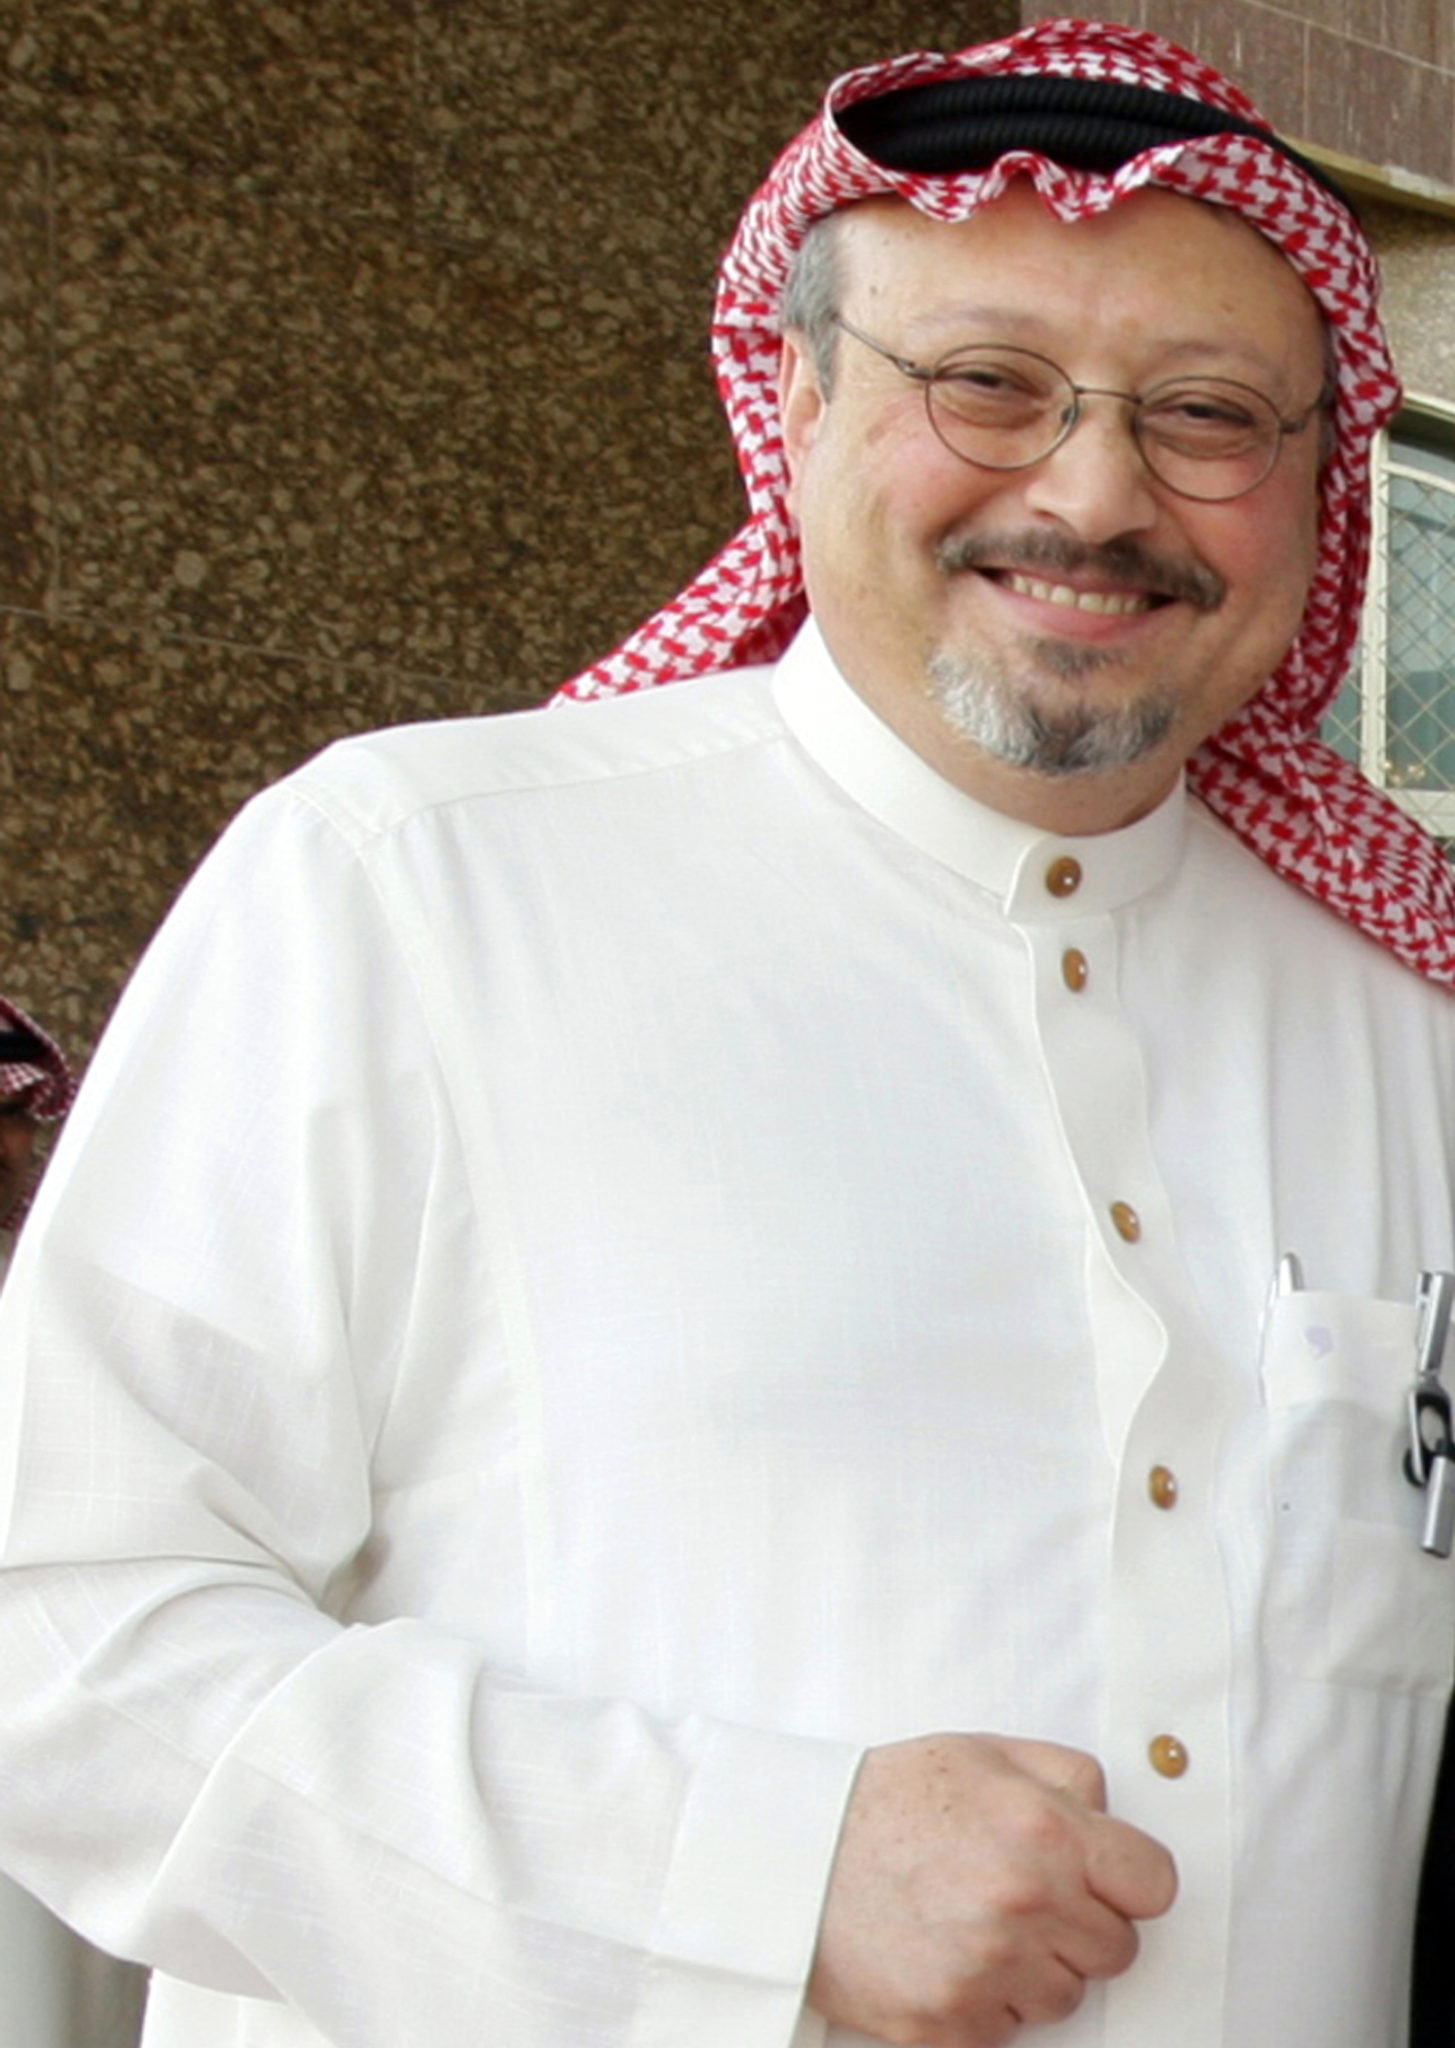 Saudi Arabia: One year after Khashoggi killing, activists honour his legacy by continuing to fight for freedom of expression